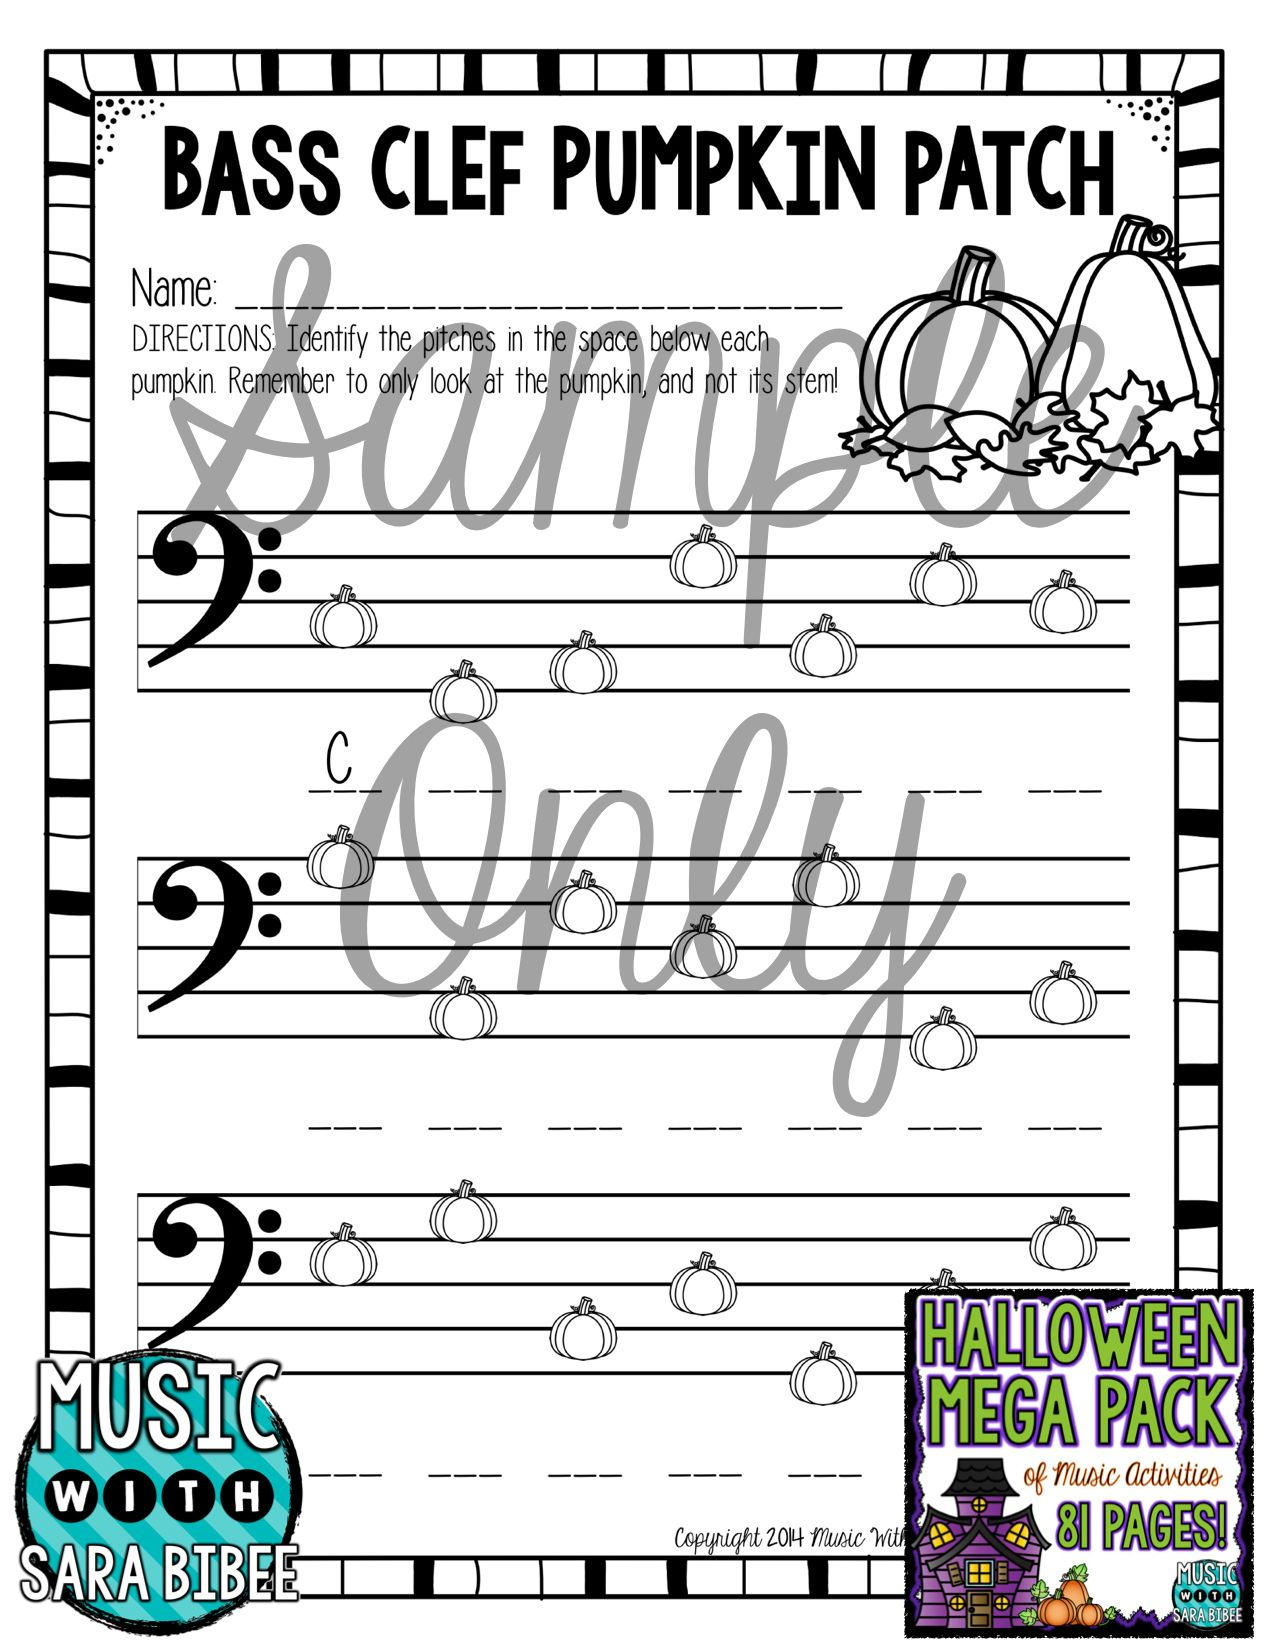 81 Pages Of Halloween-Themed Music Worksheets! | Music